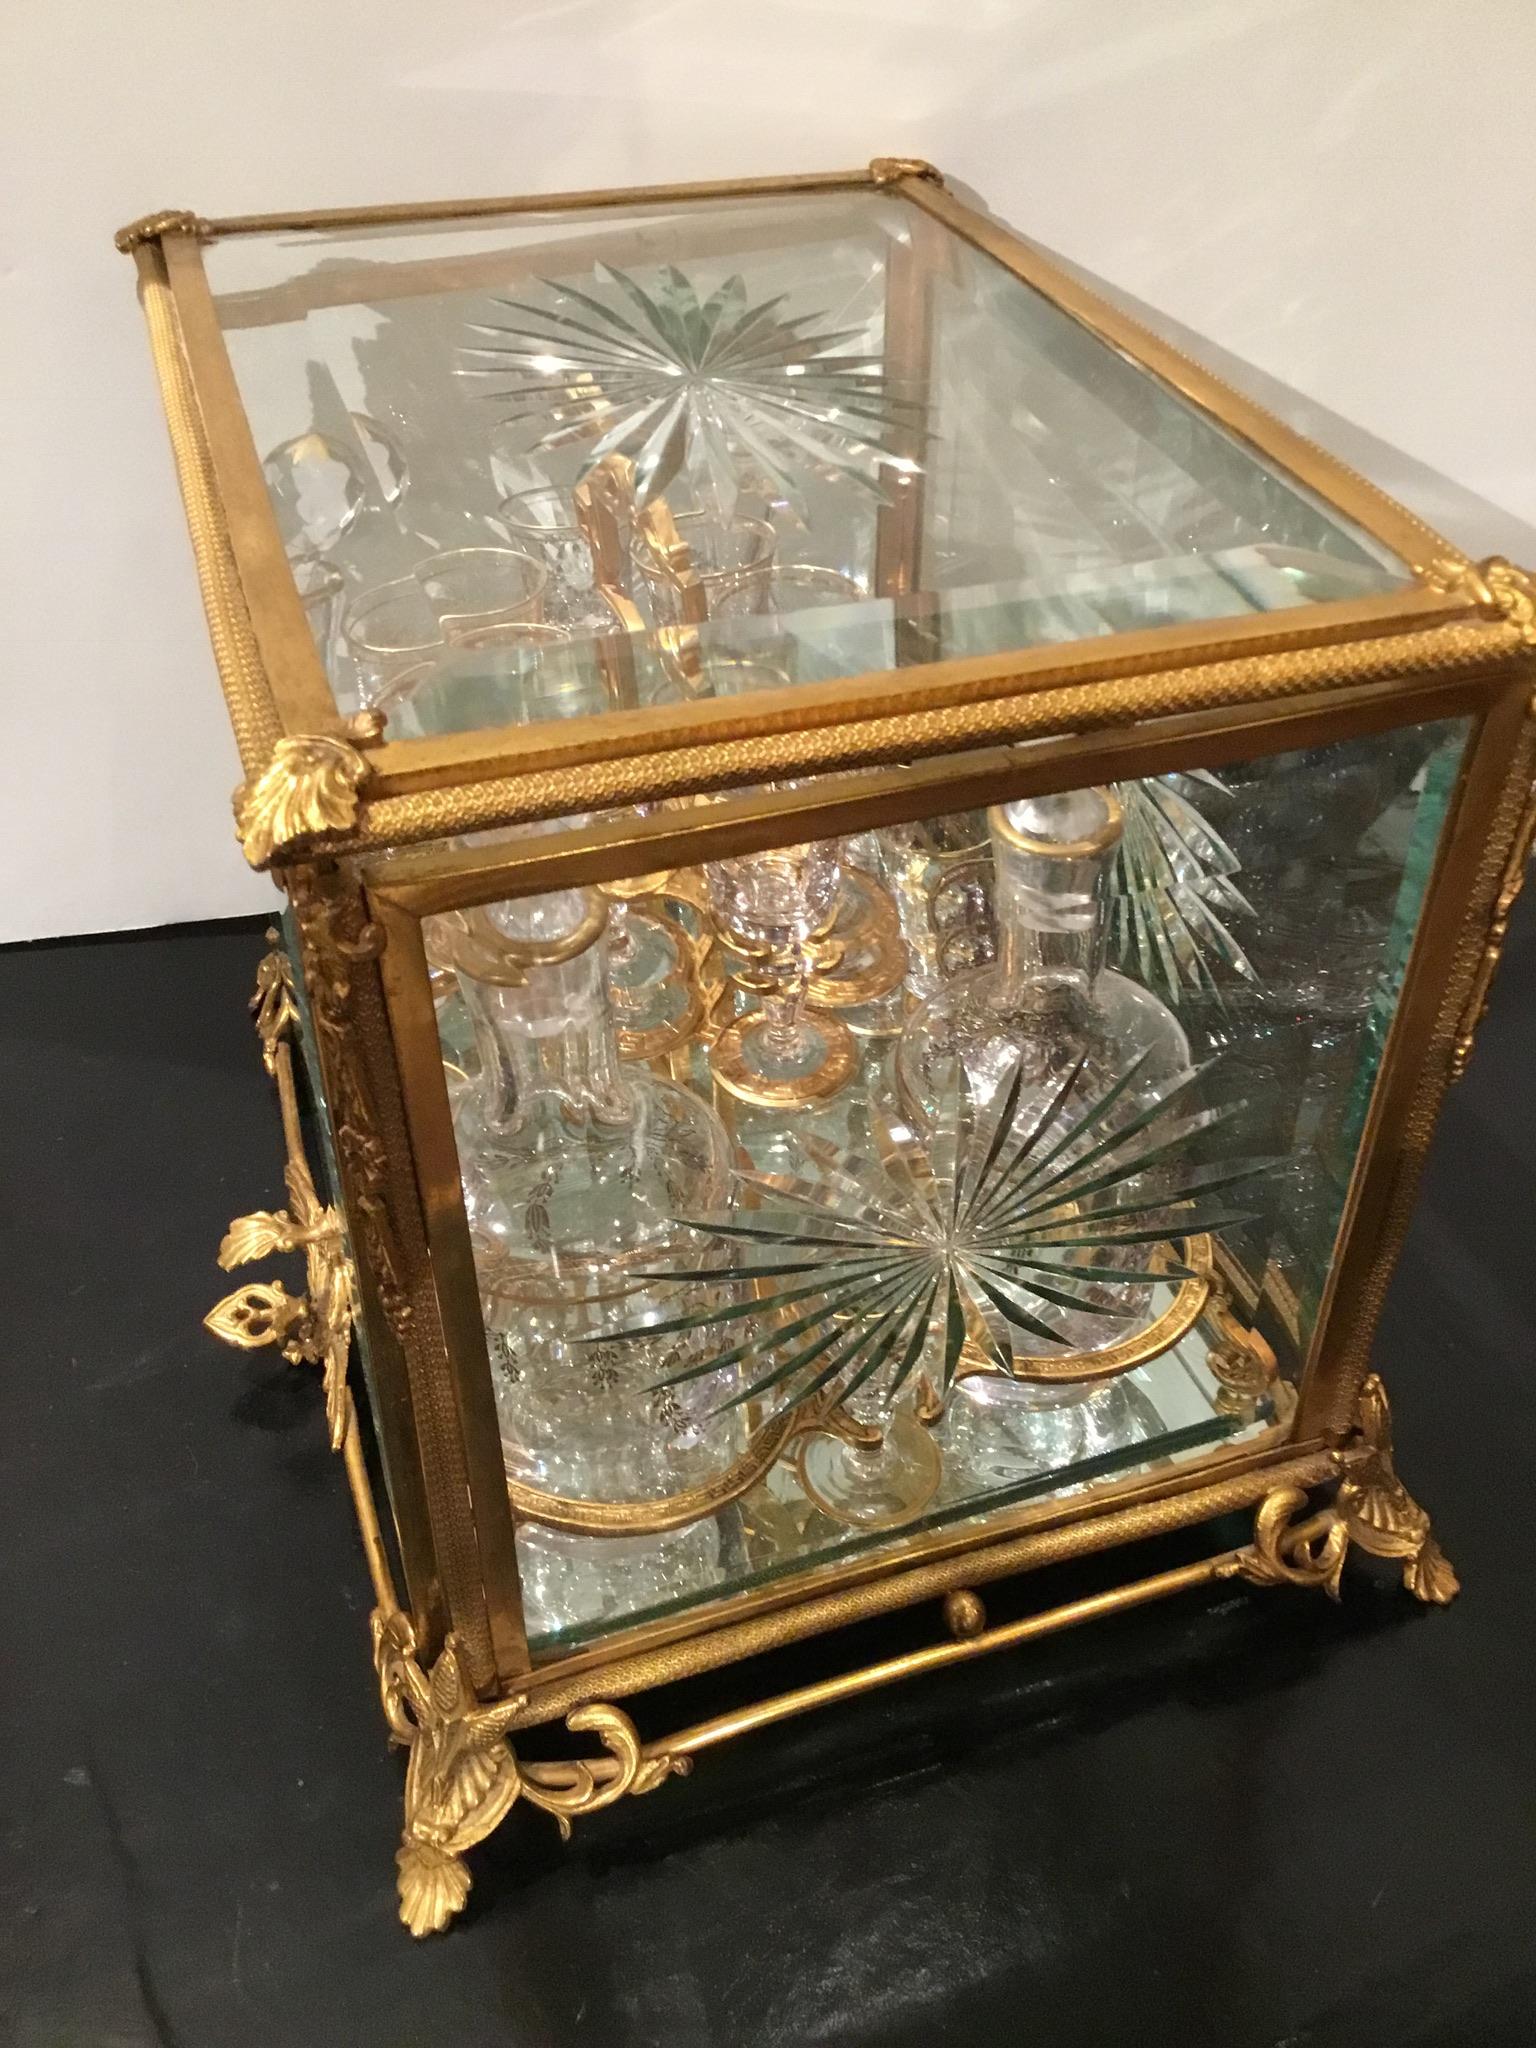 The Tantalus set is gilt bronze and glass  and is complete with
16 gold trimmed glasses and 4 gold trimmed decanters.
19th Century